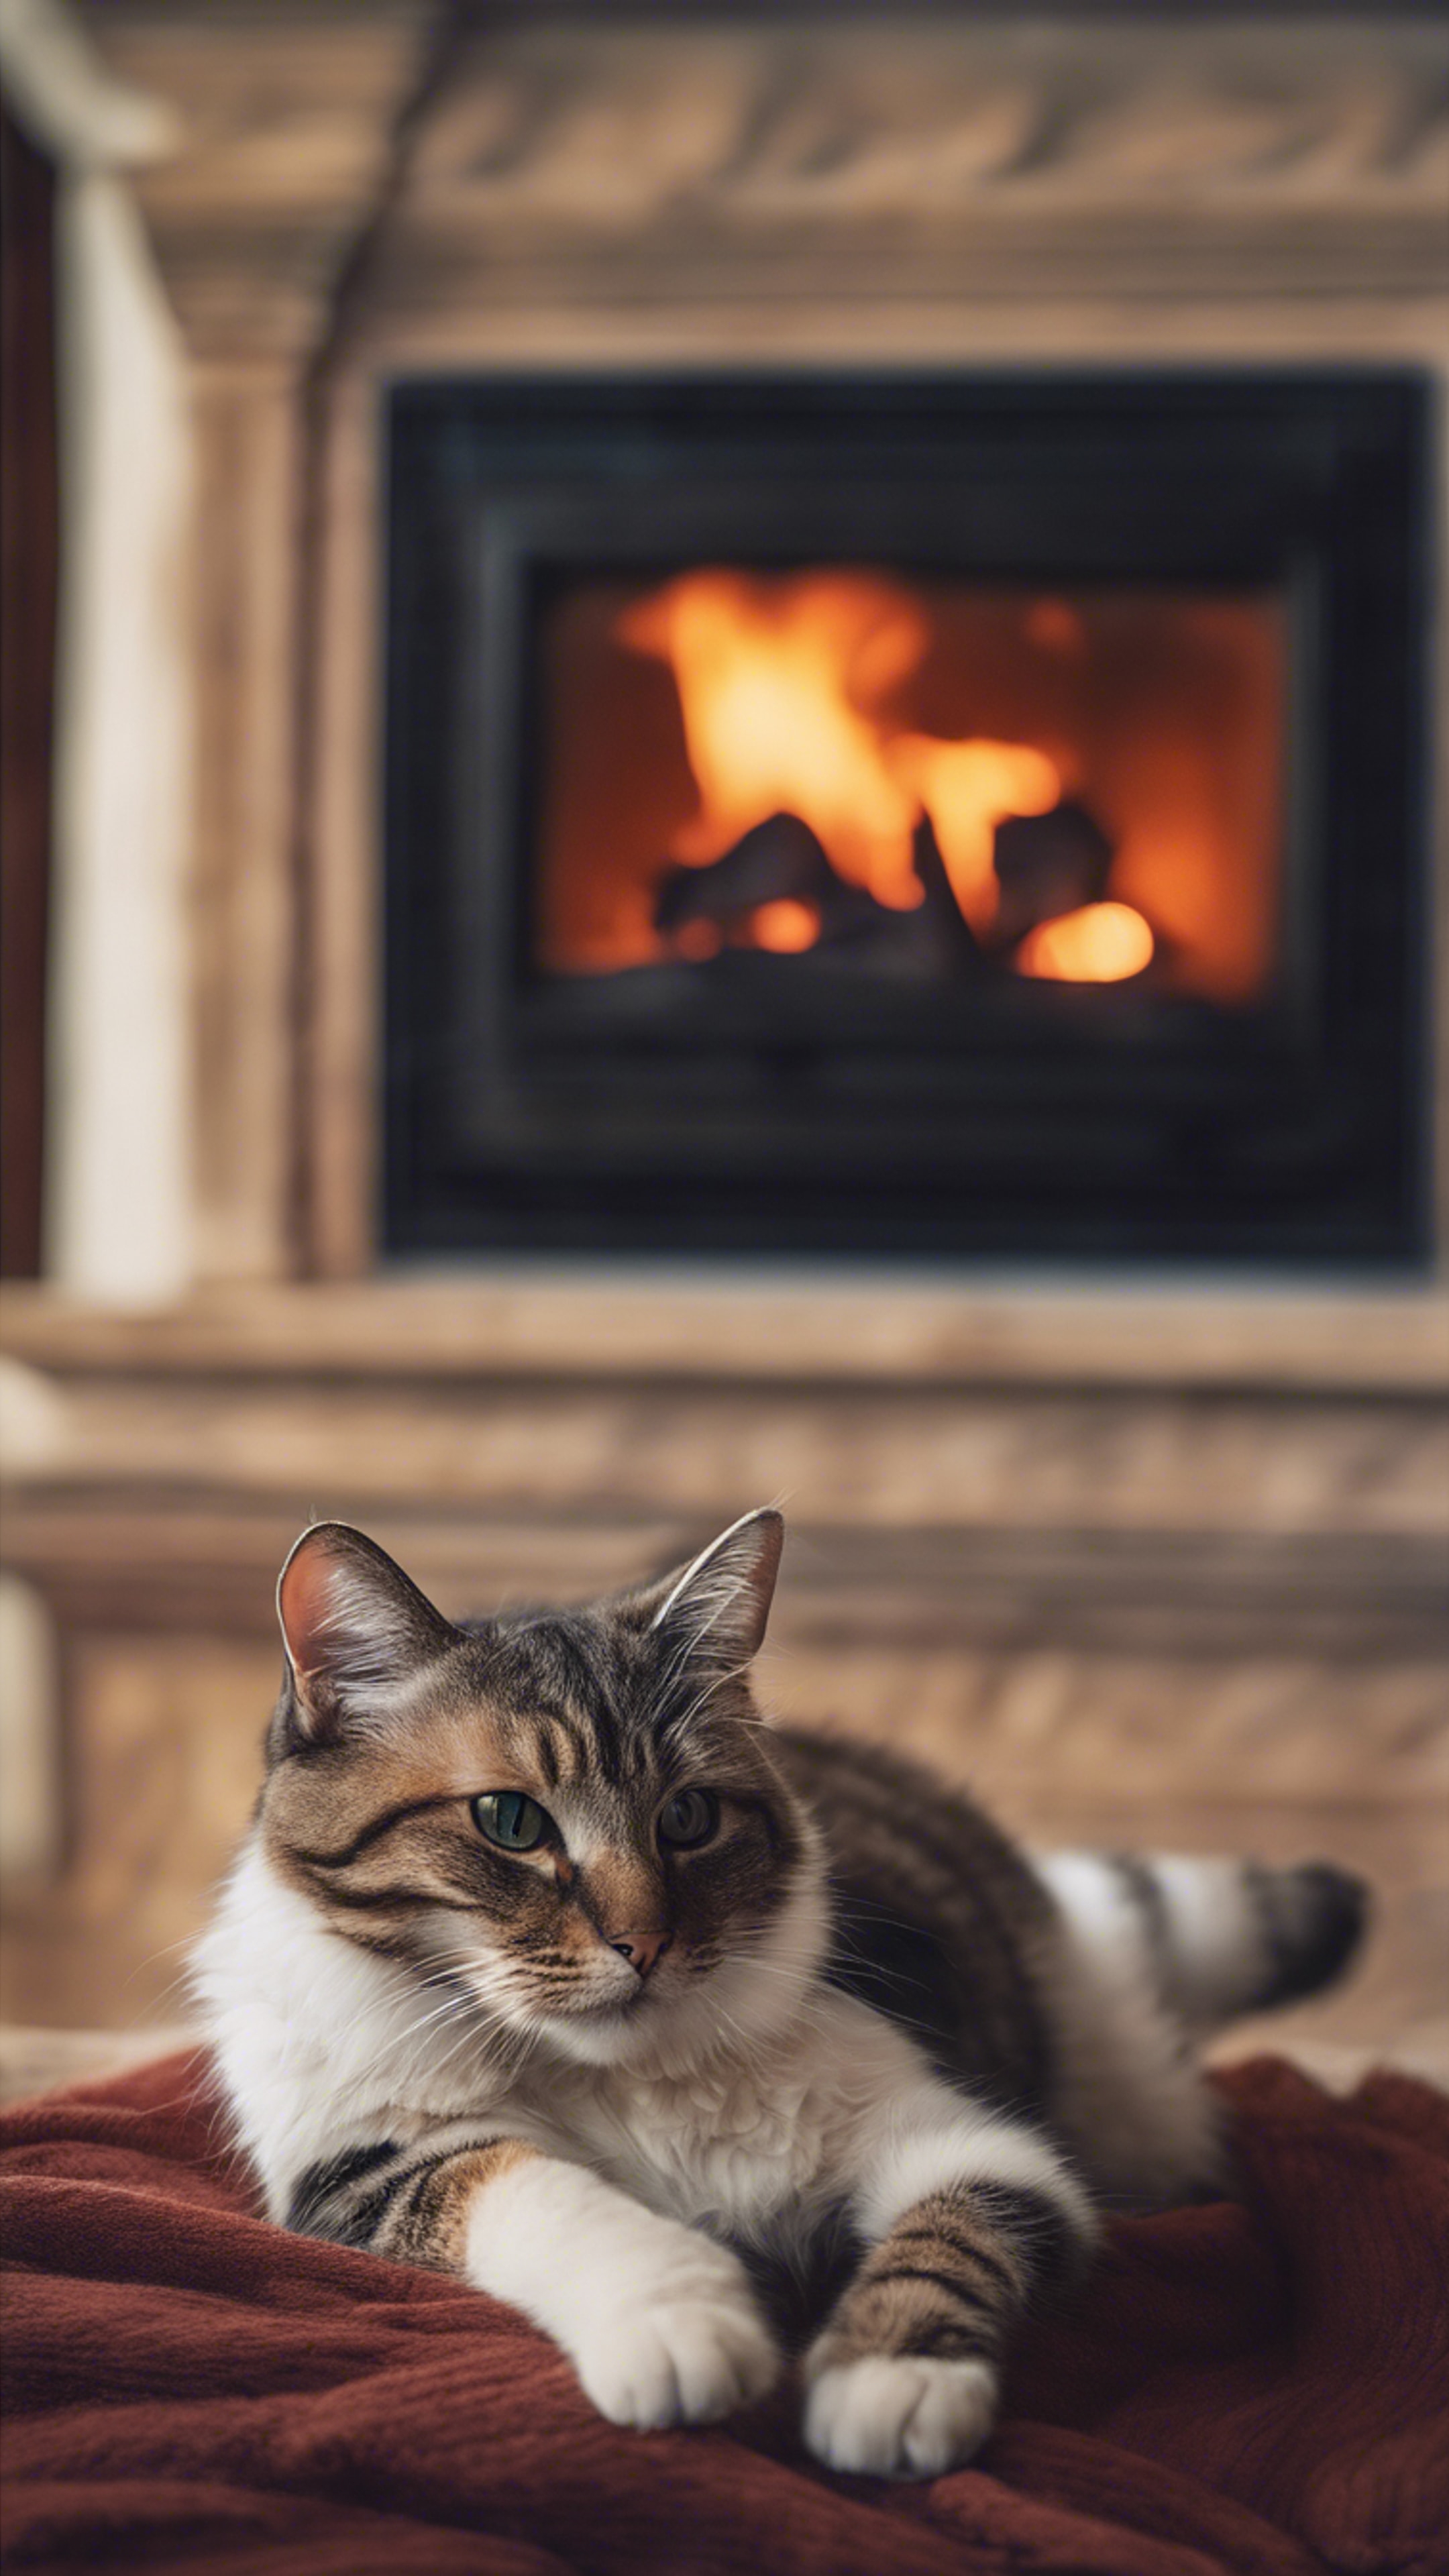 A cat lounging in front of a roaring fireplace, completely mesmerized by the flickering flames. Обои[f30d5ca7e04c497dade0]